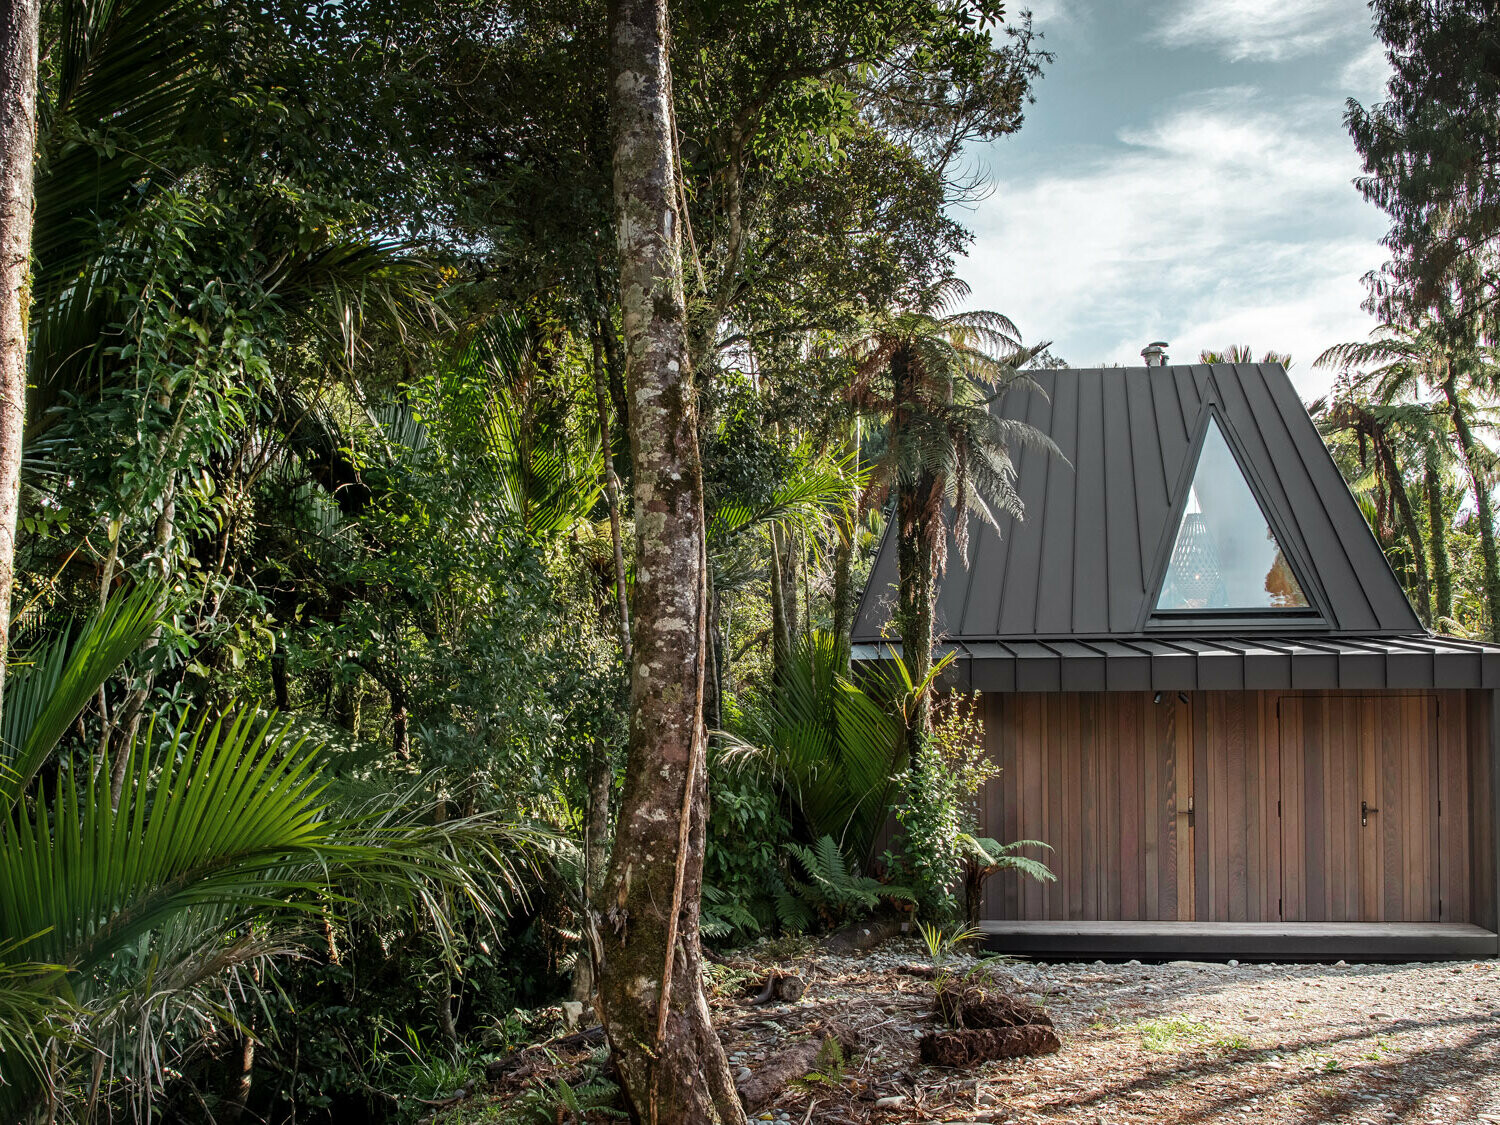 Side view of the bivouac realised by Fabric with the striking, black-grey Prefalz roof hidden among nīkau palms.